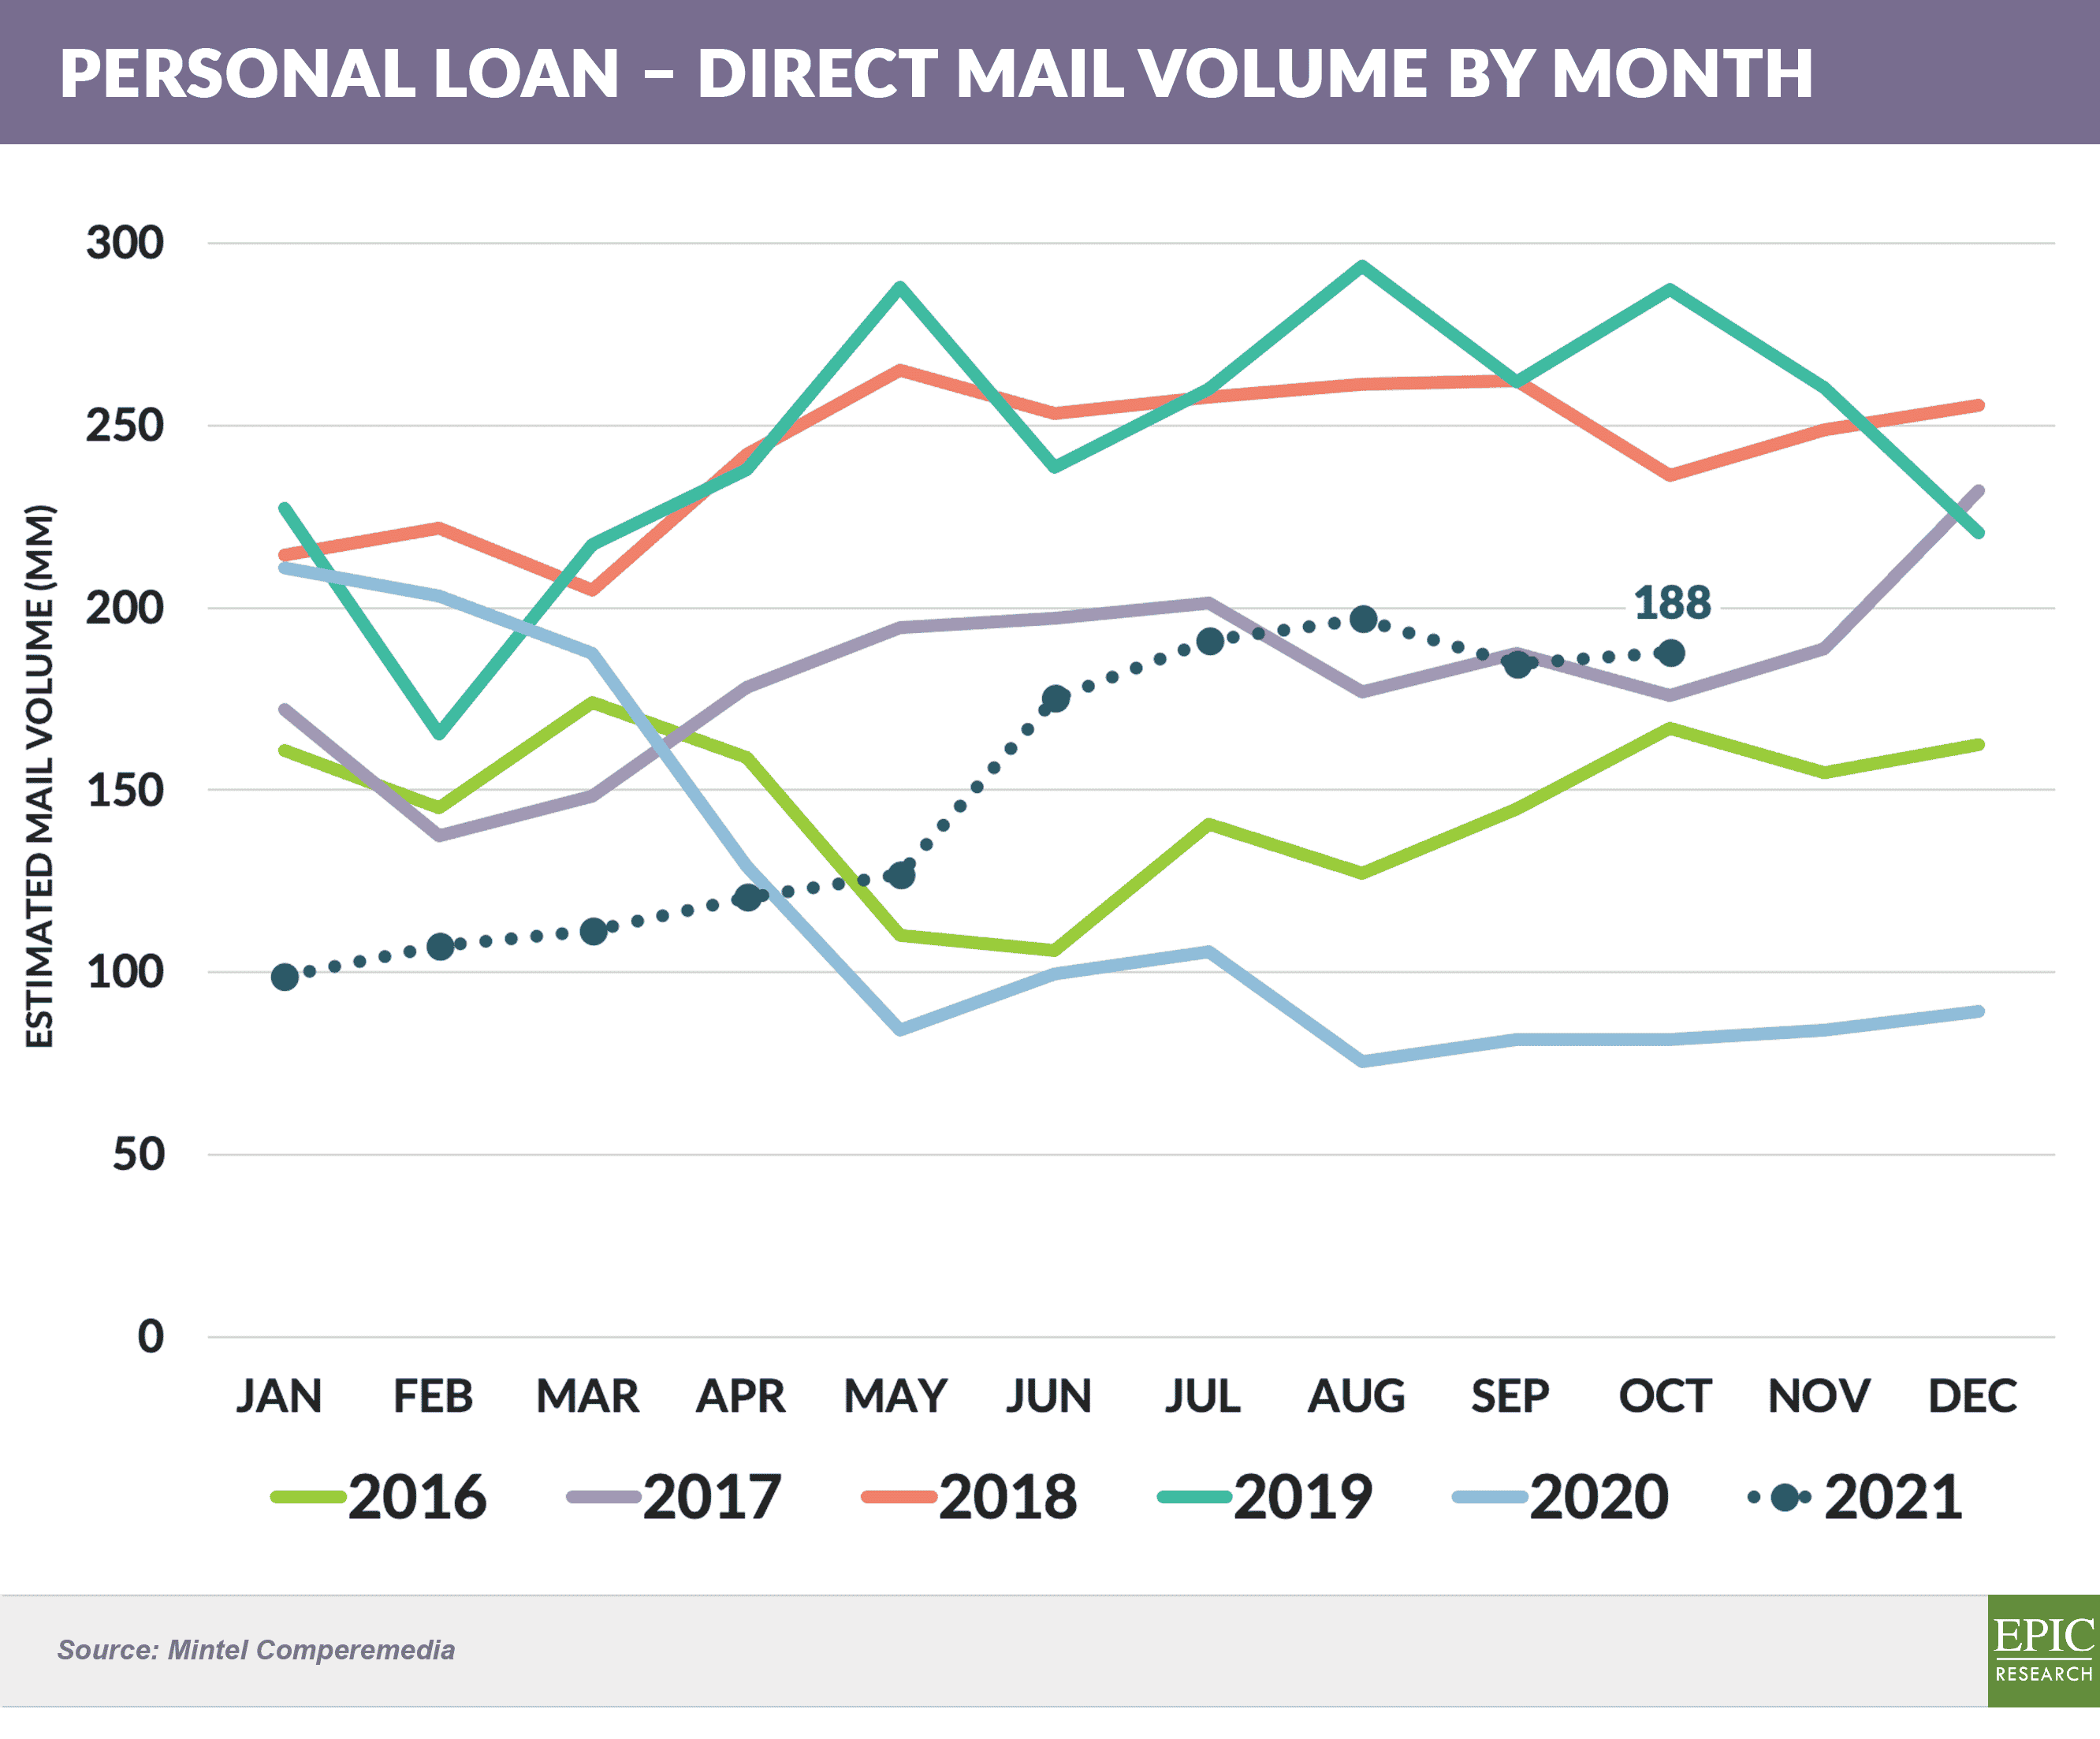 PERSONAL LOAN – DIRECT MAIL VOLUME YOY 20211204